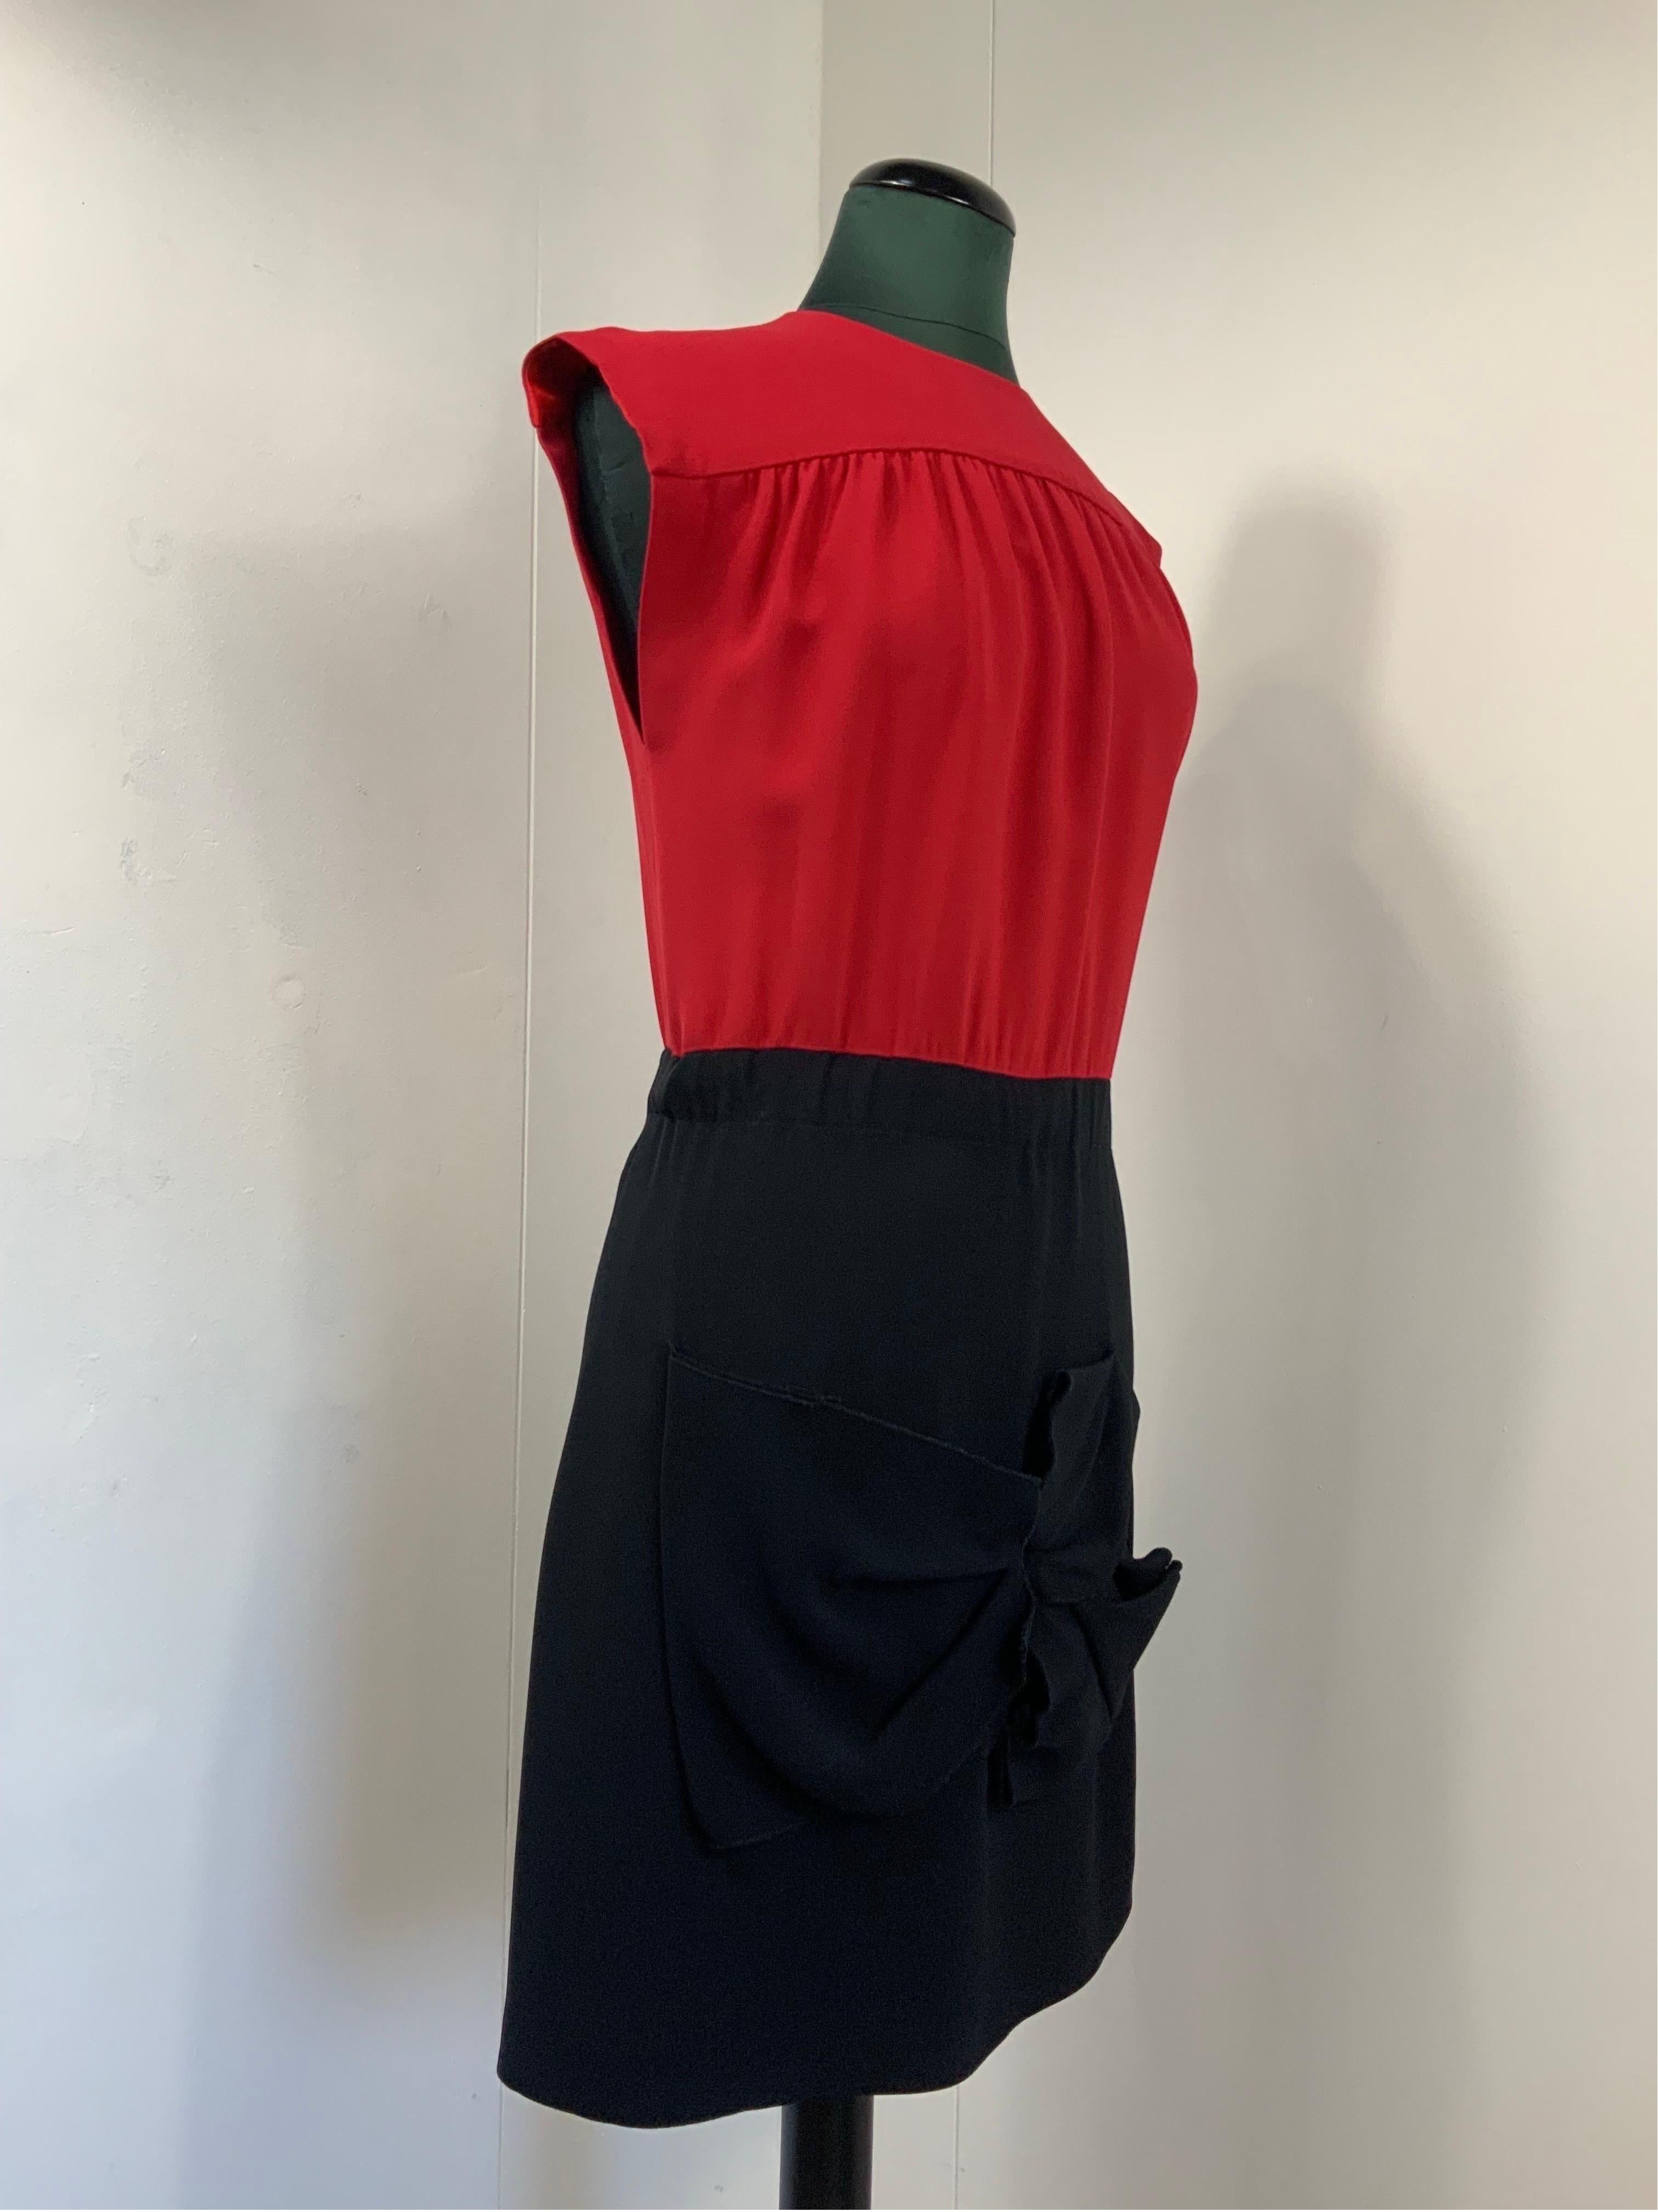 MIUMIU bicolor red and blue Dress In Good Condition For Sale In Carnate, IT